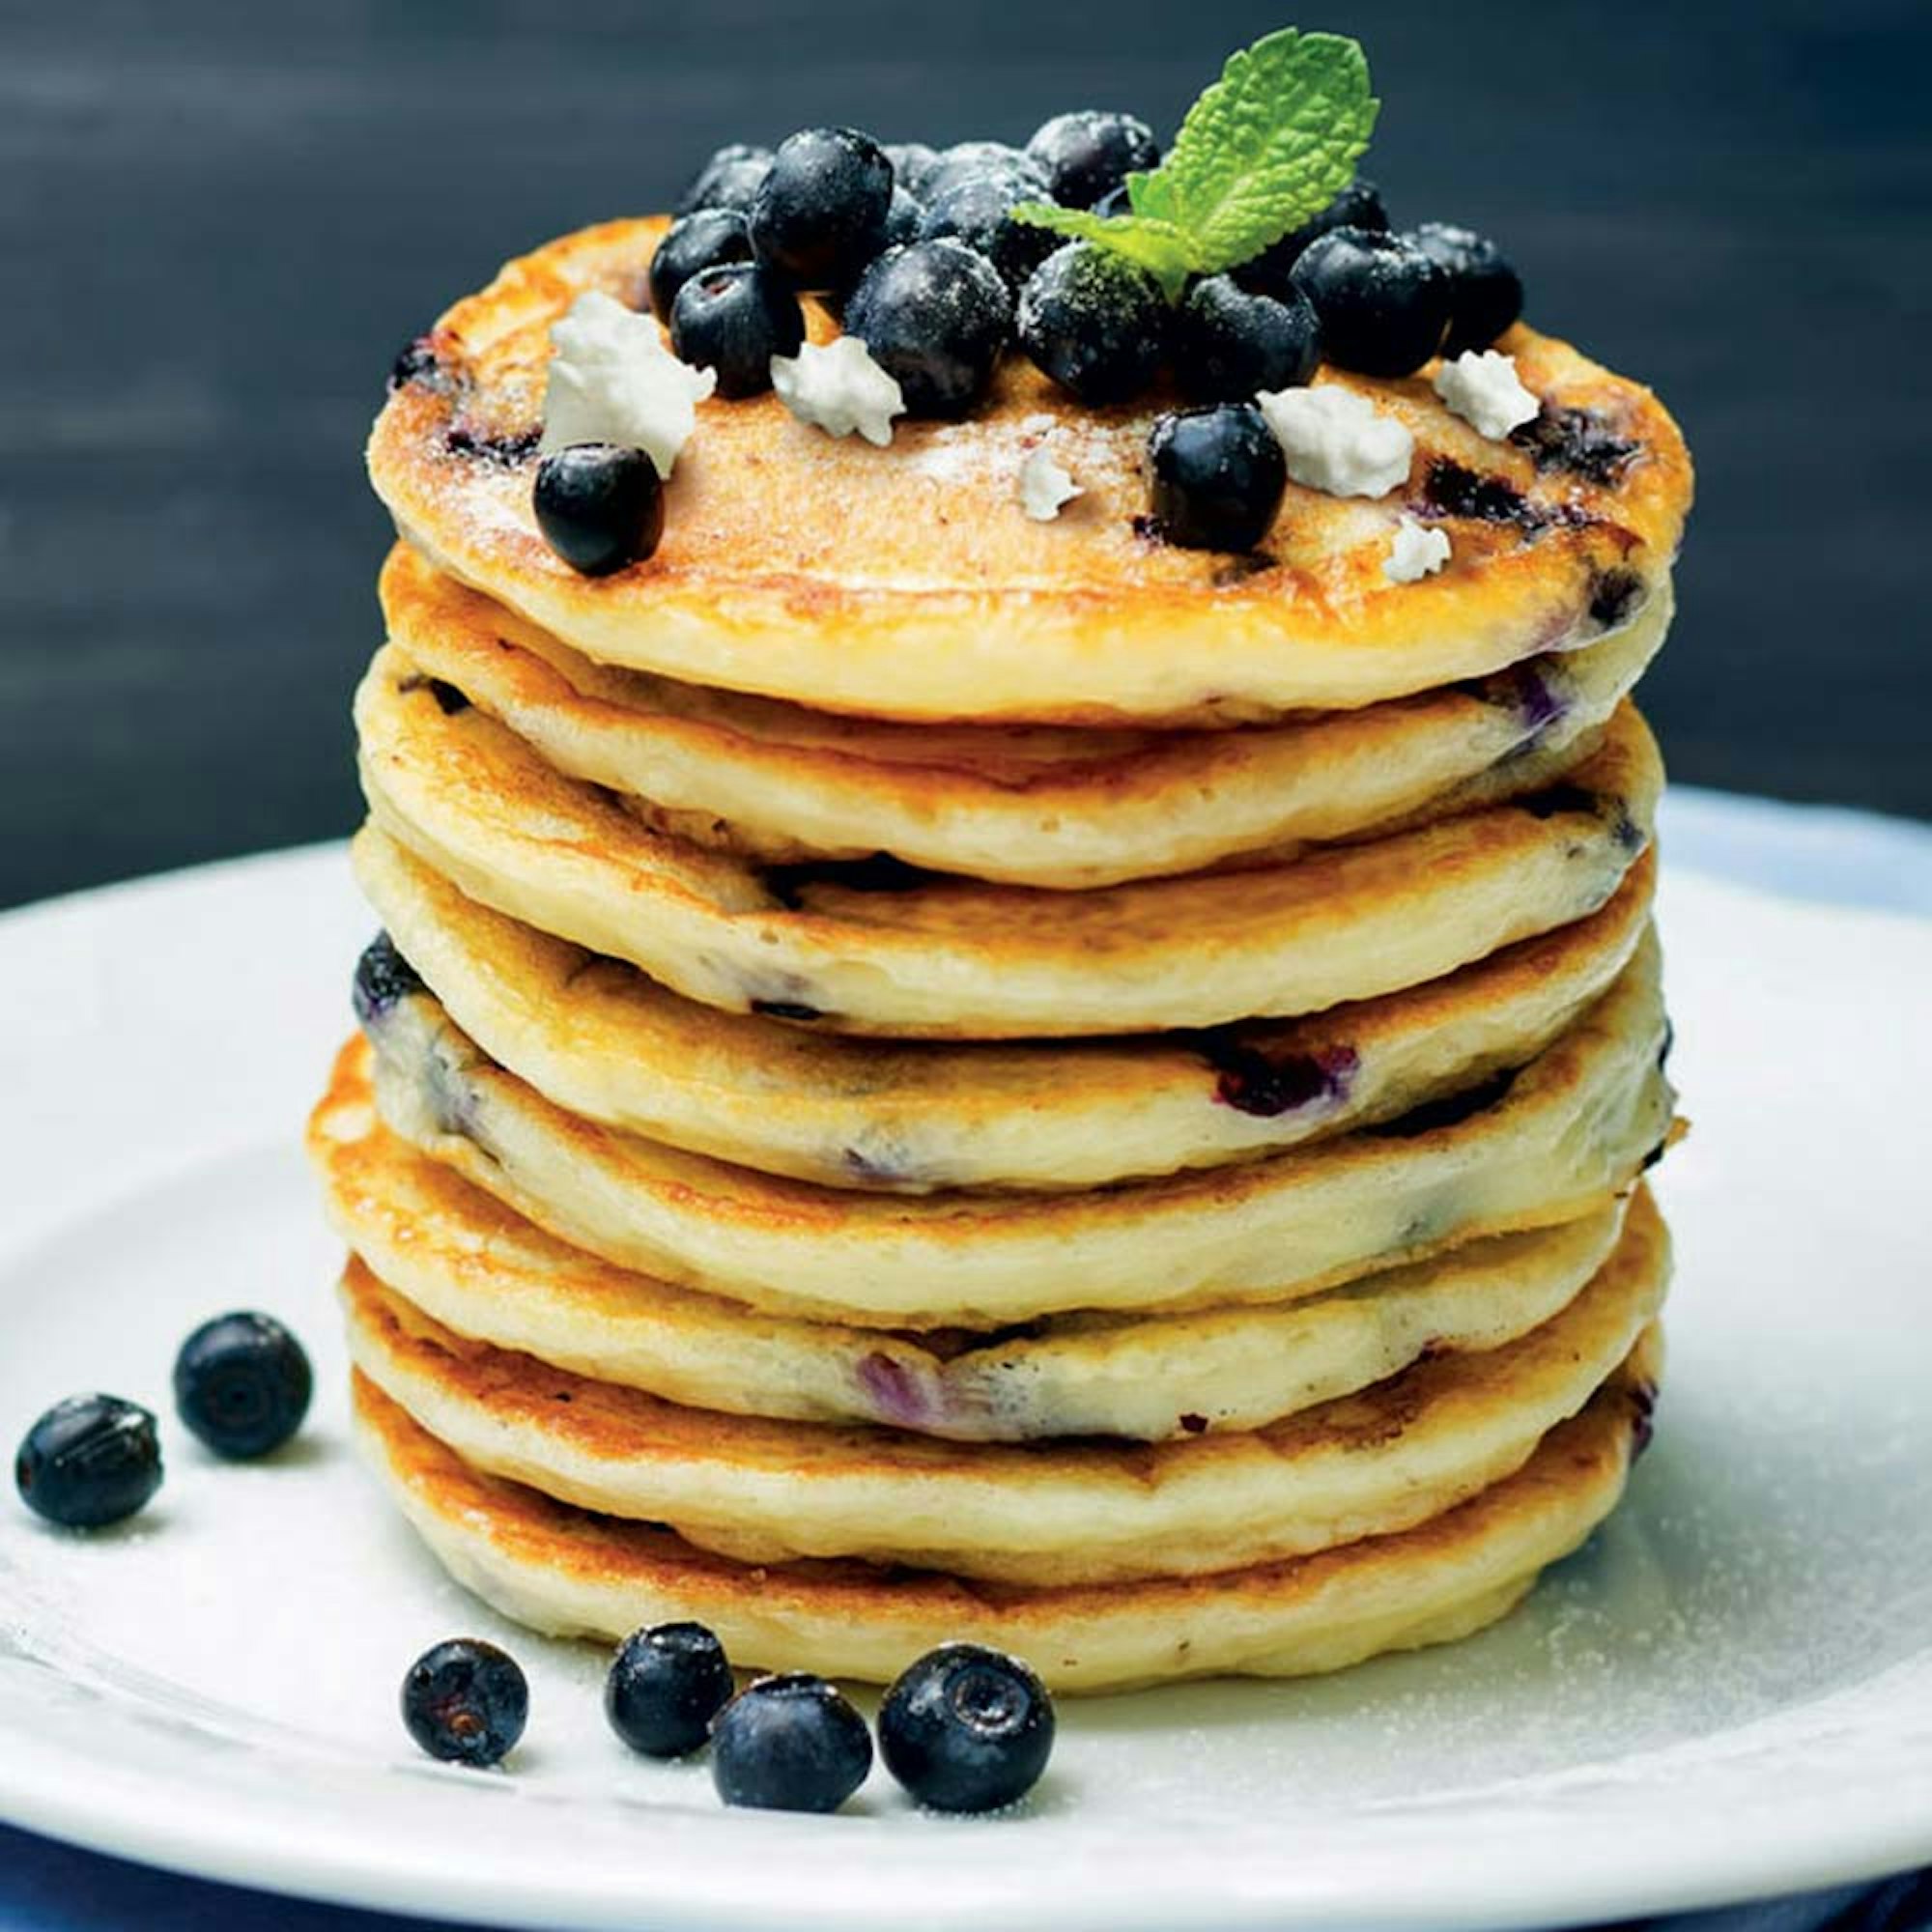 Contact Grill Pillowy Blueberry & Ricotta Pancakes recipe | Robins Kitchen blog